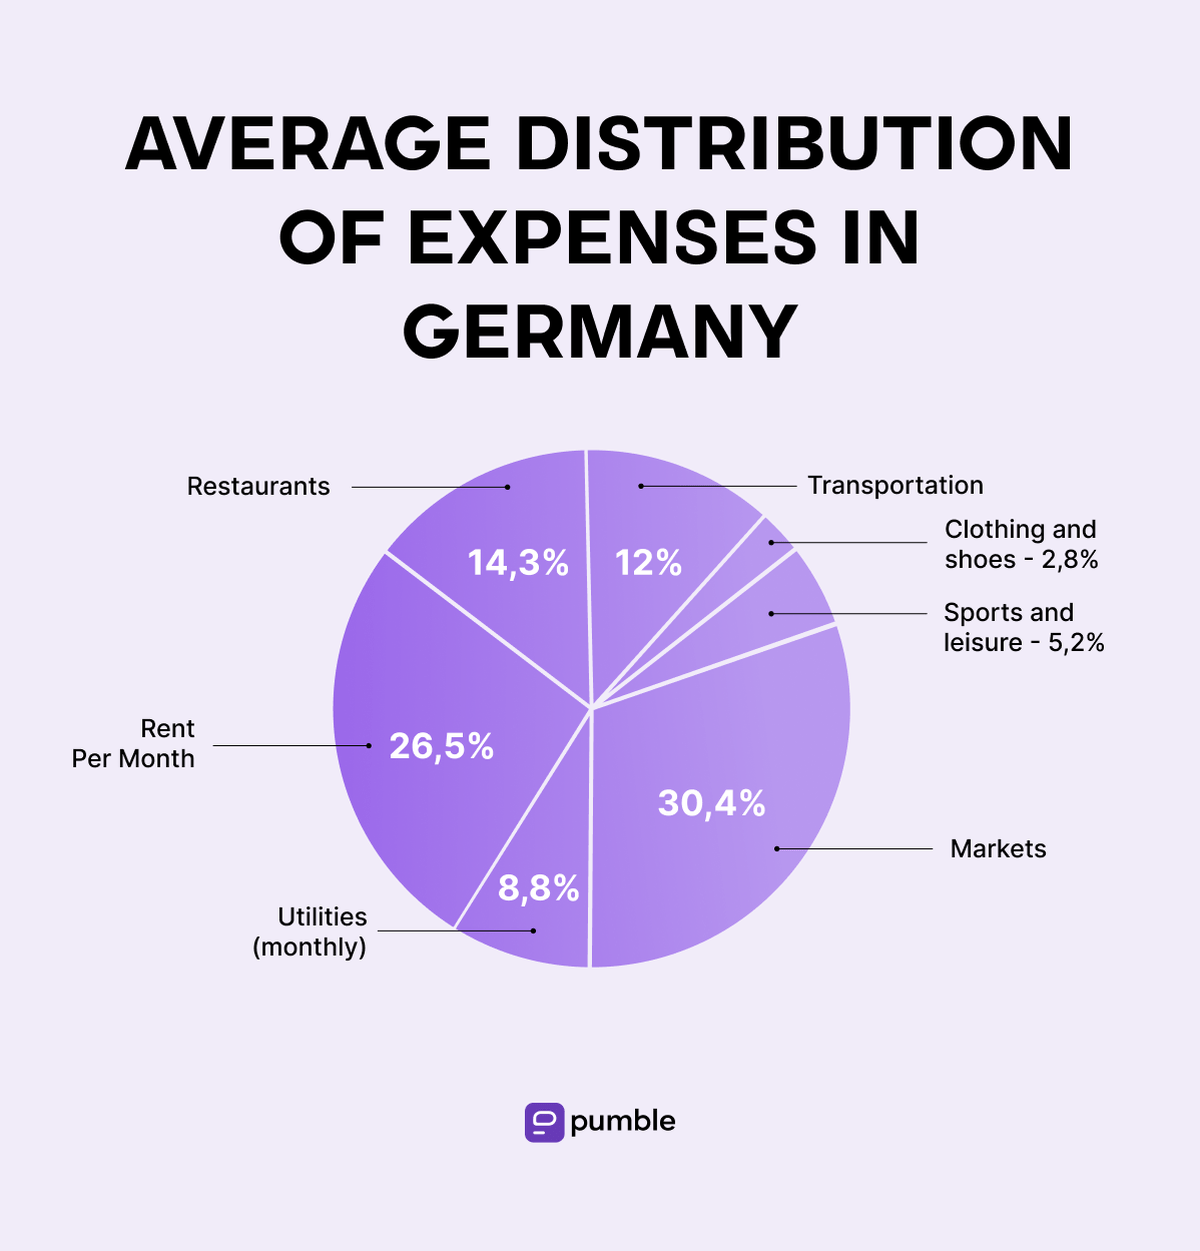 Average distribution of expenses in Germany